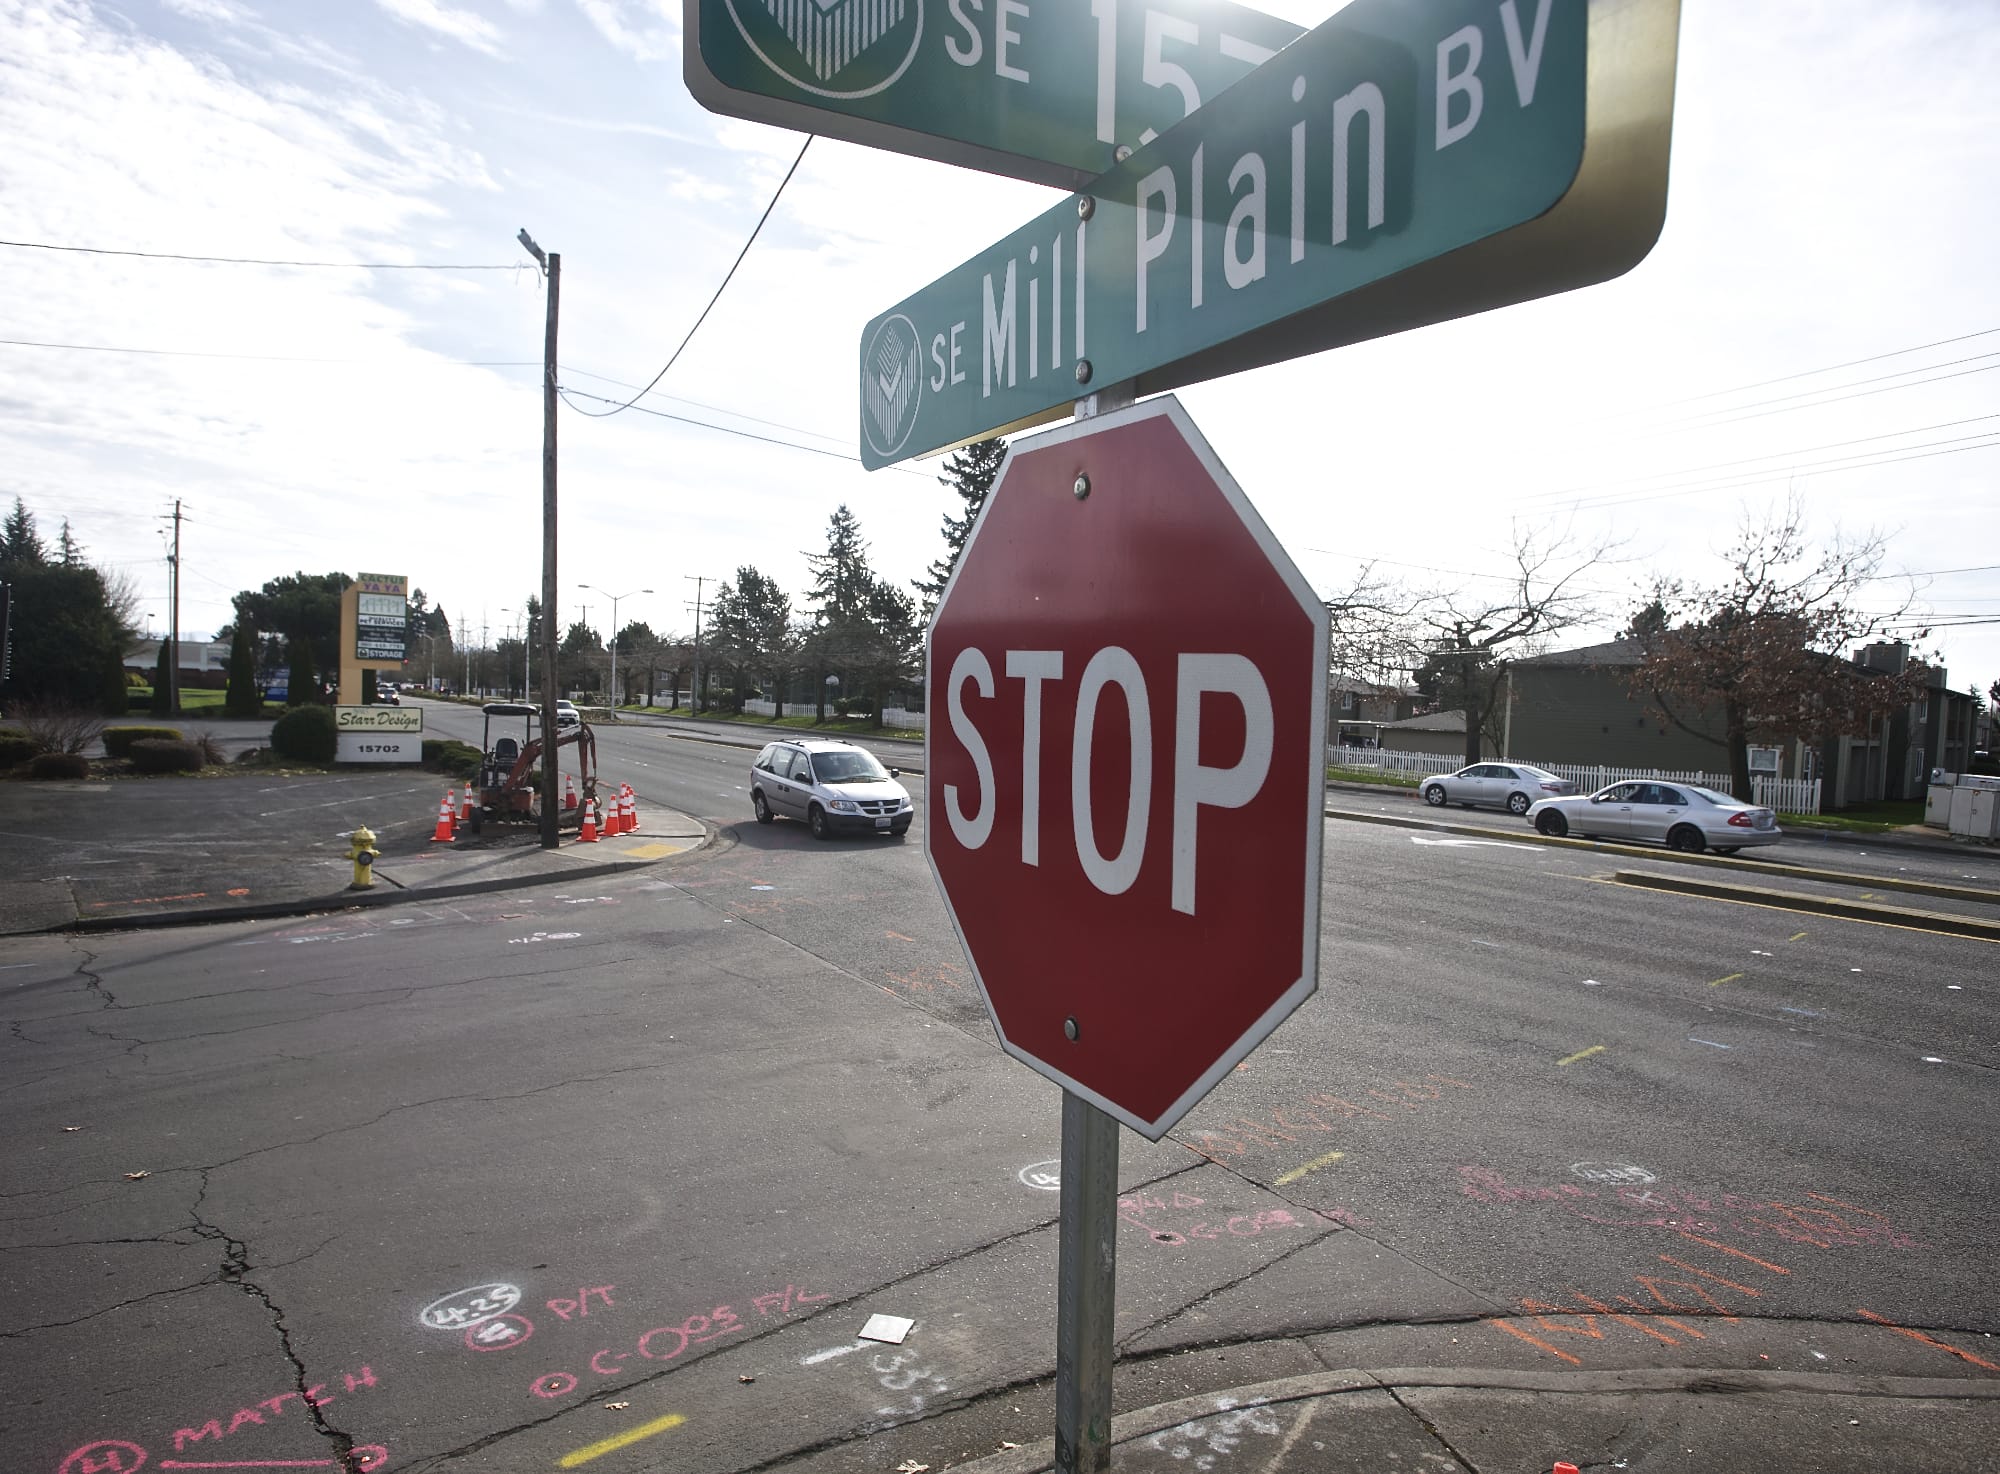 The intersection of Southeast Mill Plain Boulevard and 157th Avenue will soon receive a new crosswalk beacon.